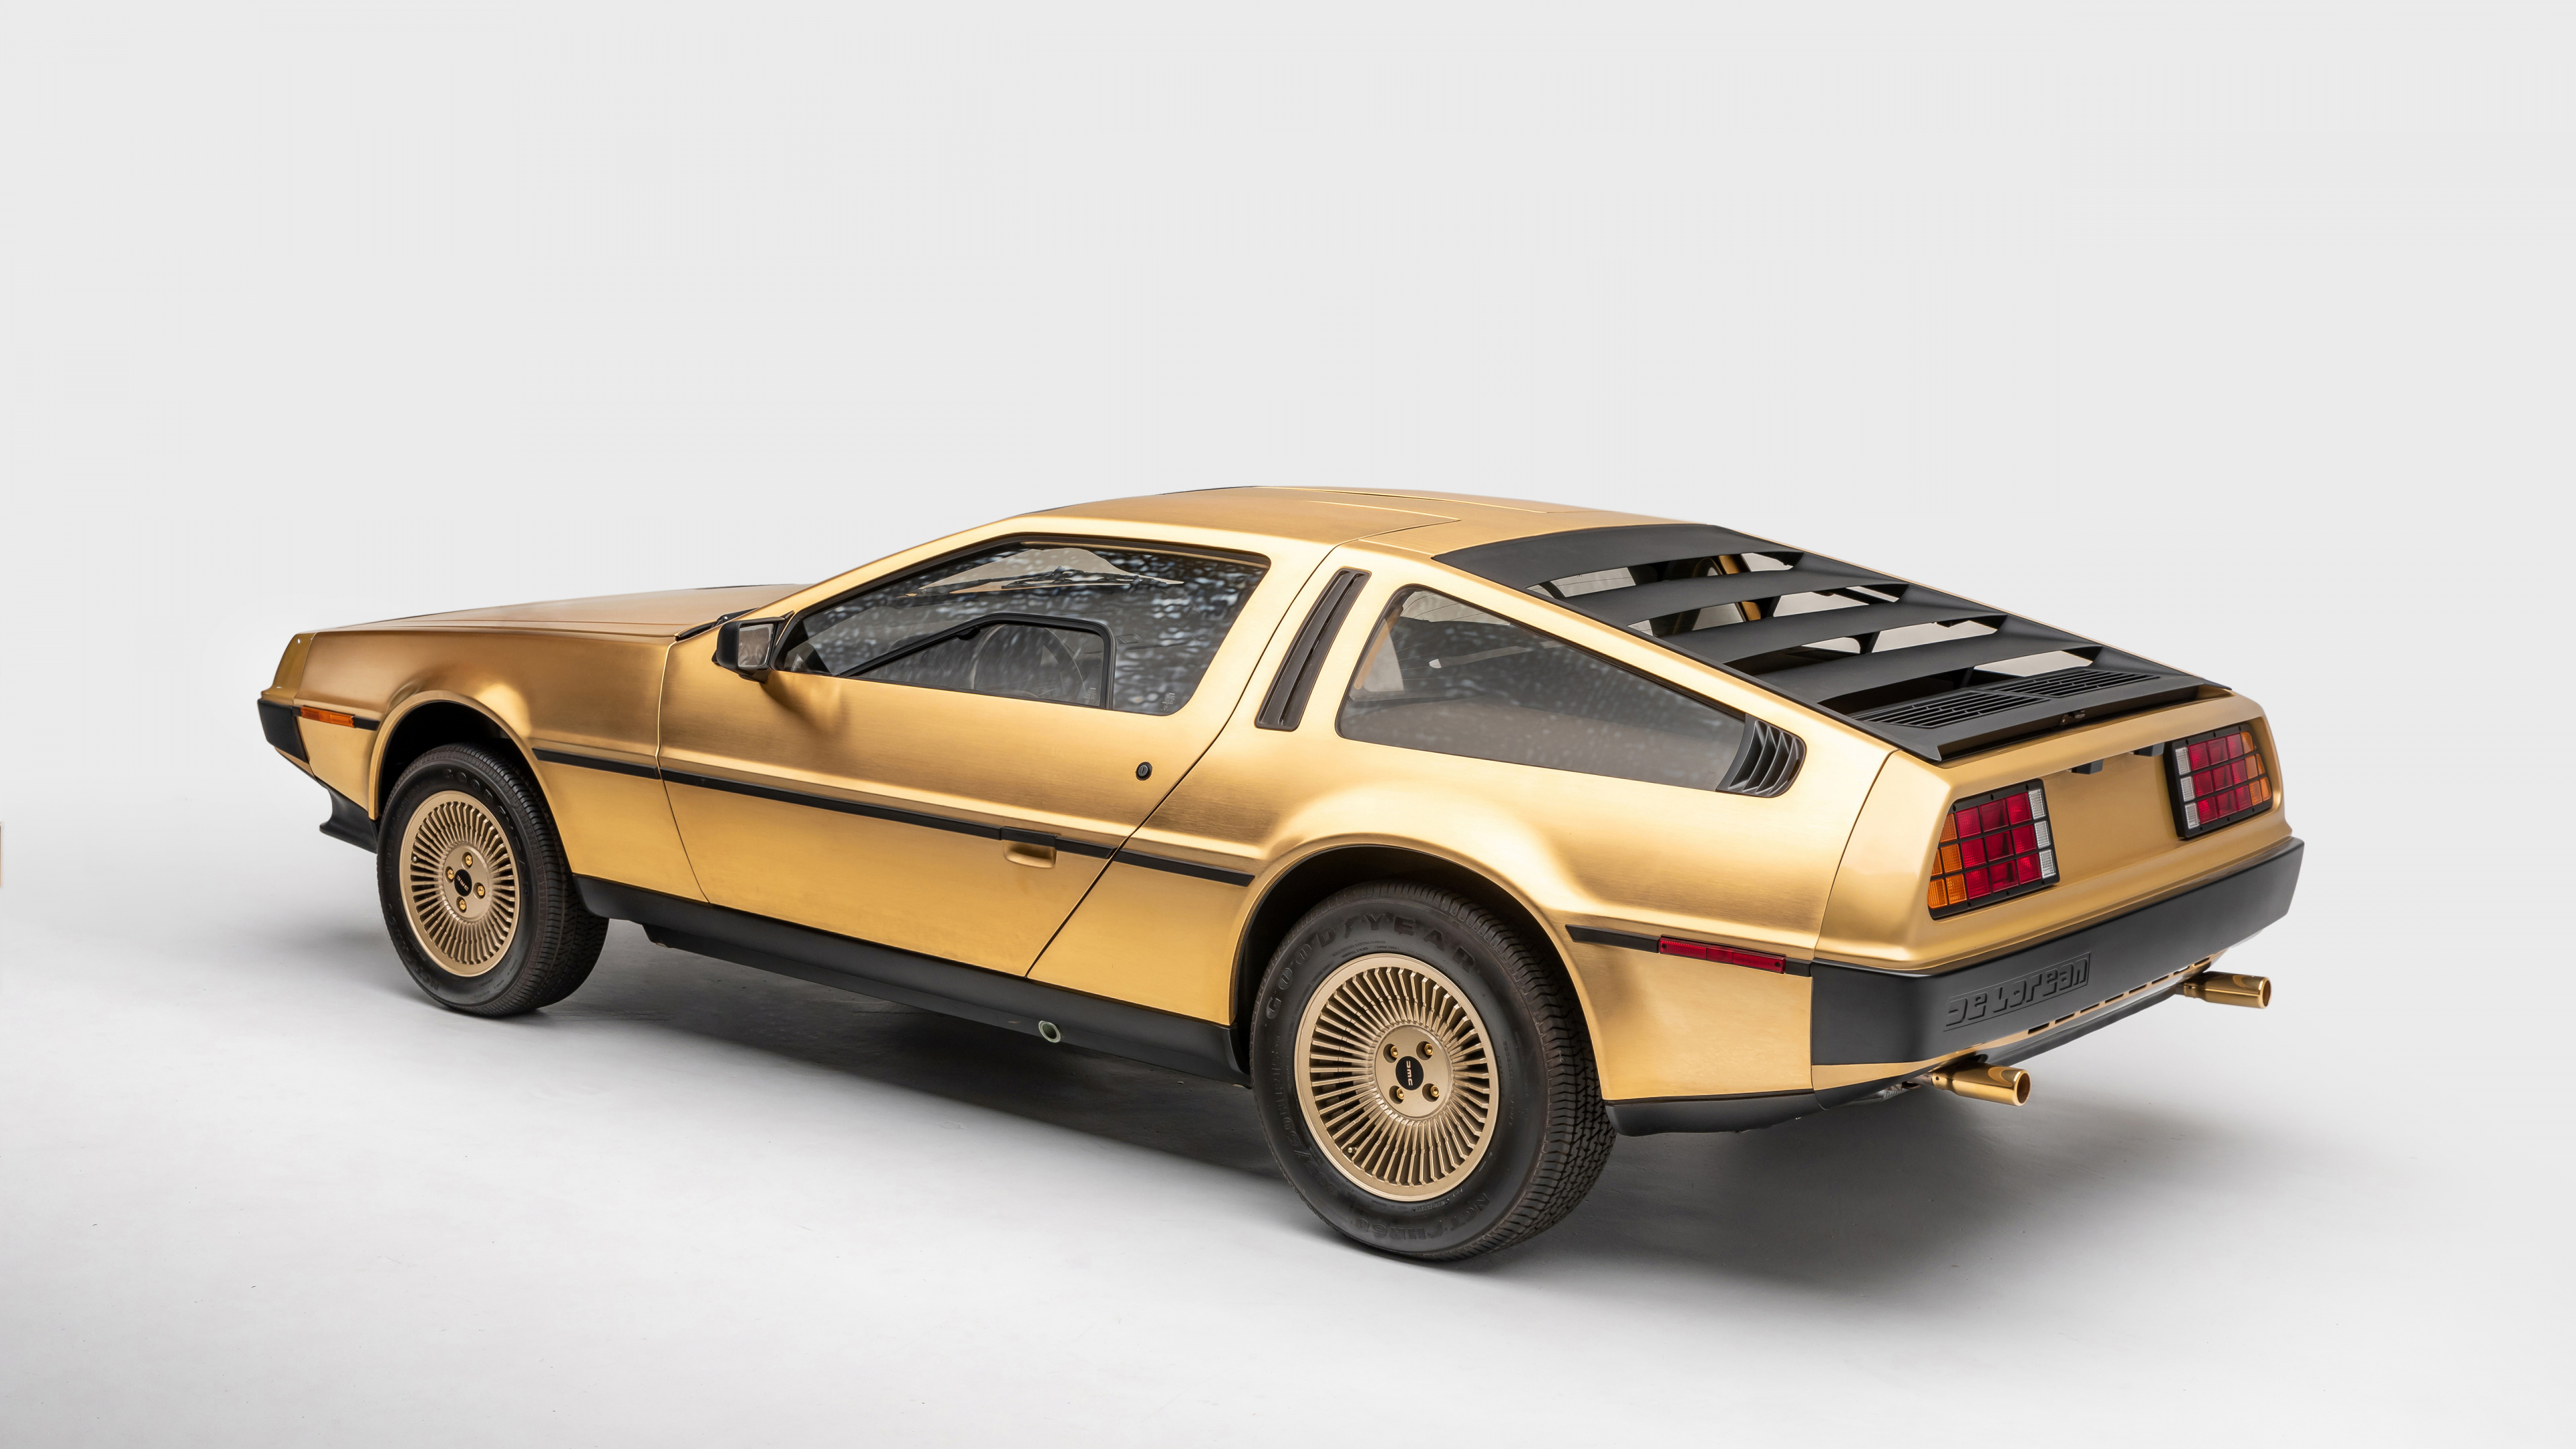 Delorean Dmc 12, DMC DeLorean, DeLorean, DeLorean Motor Company, Roue. Wallpaper in 3840x2160 Resolution